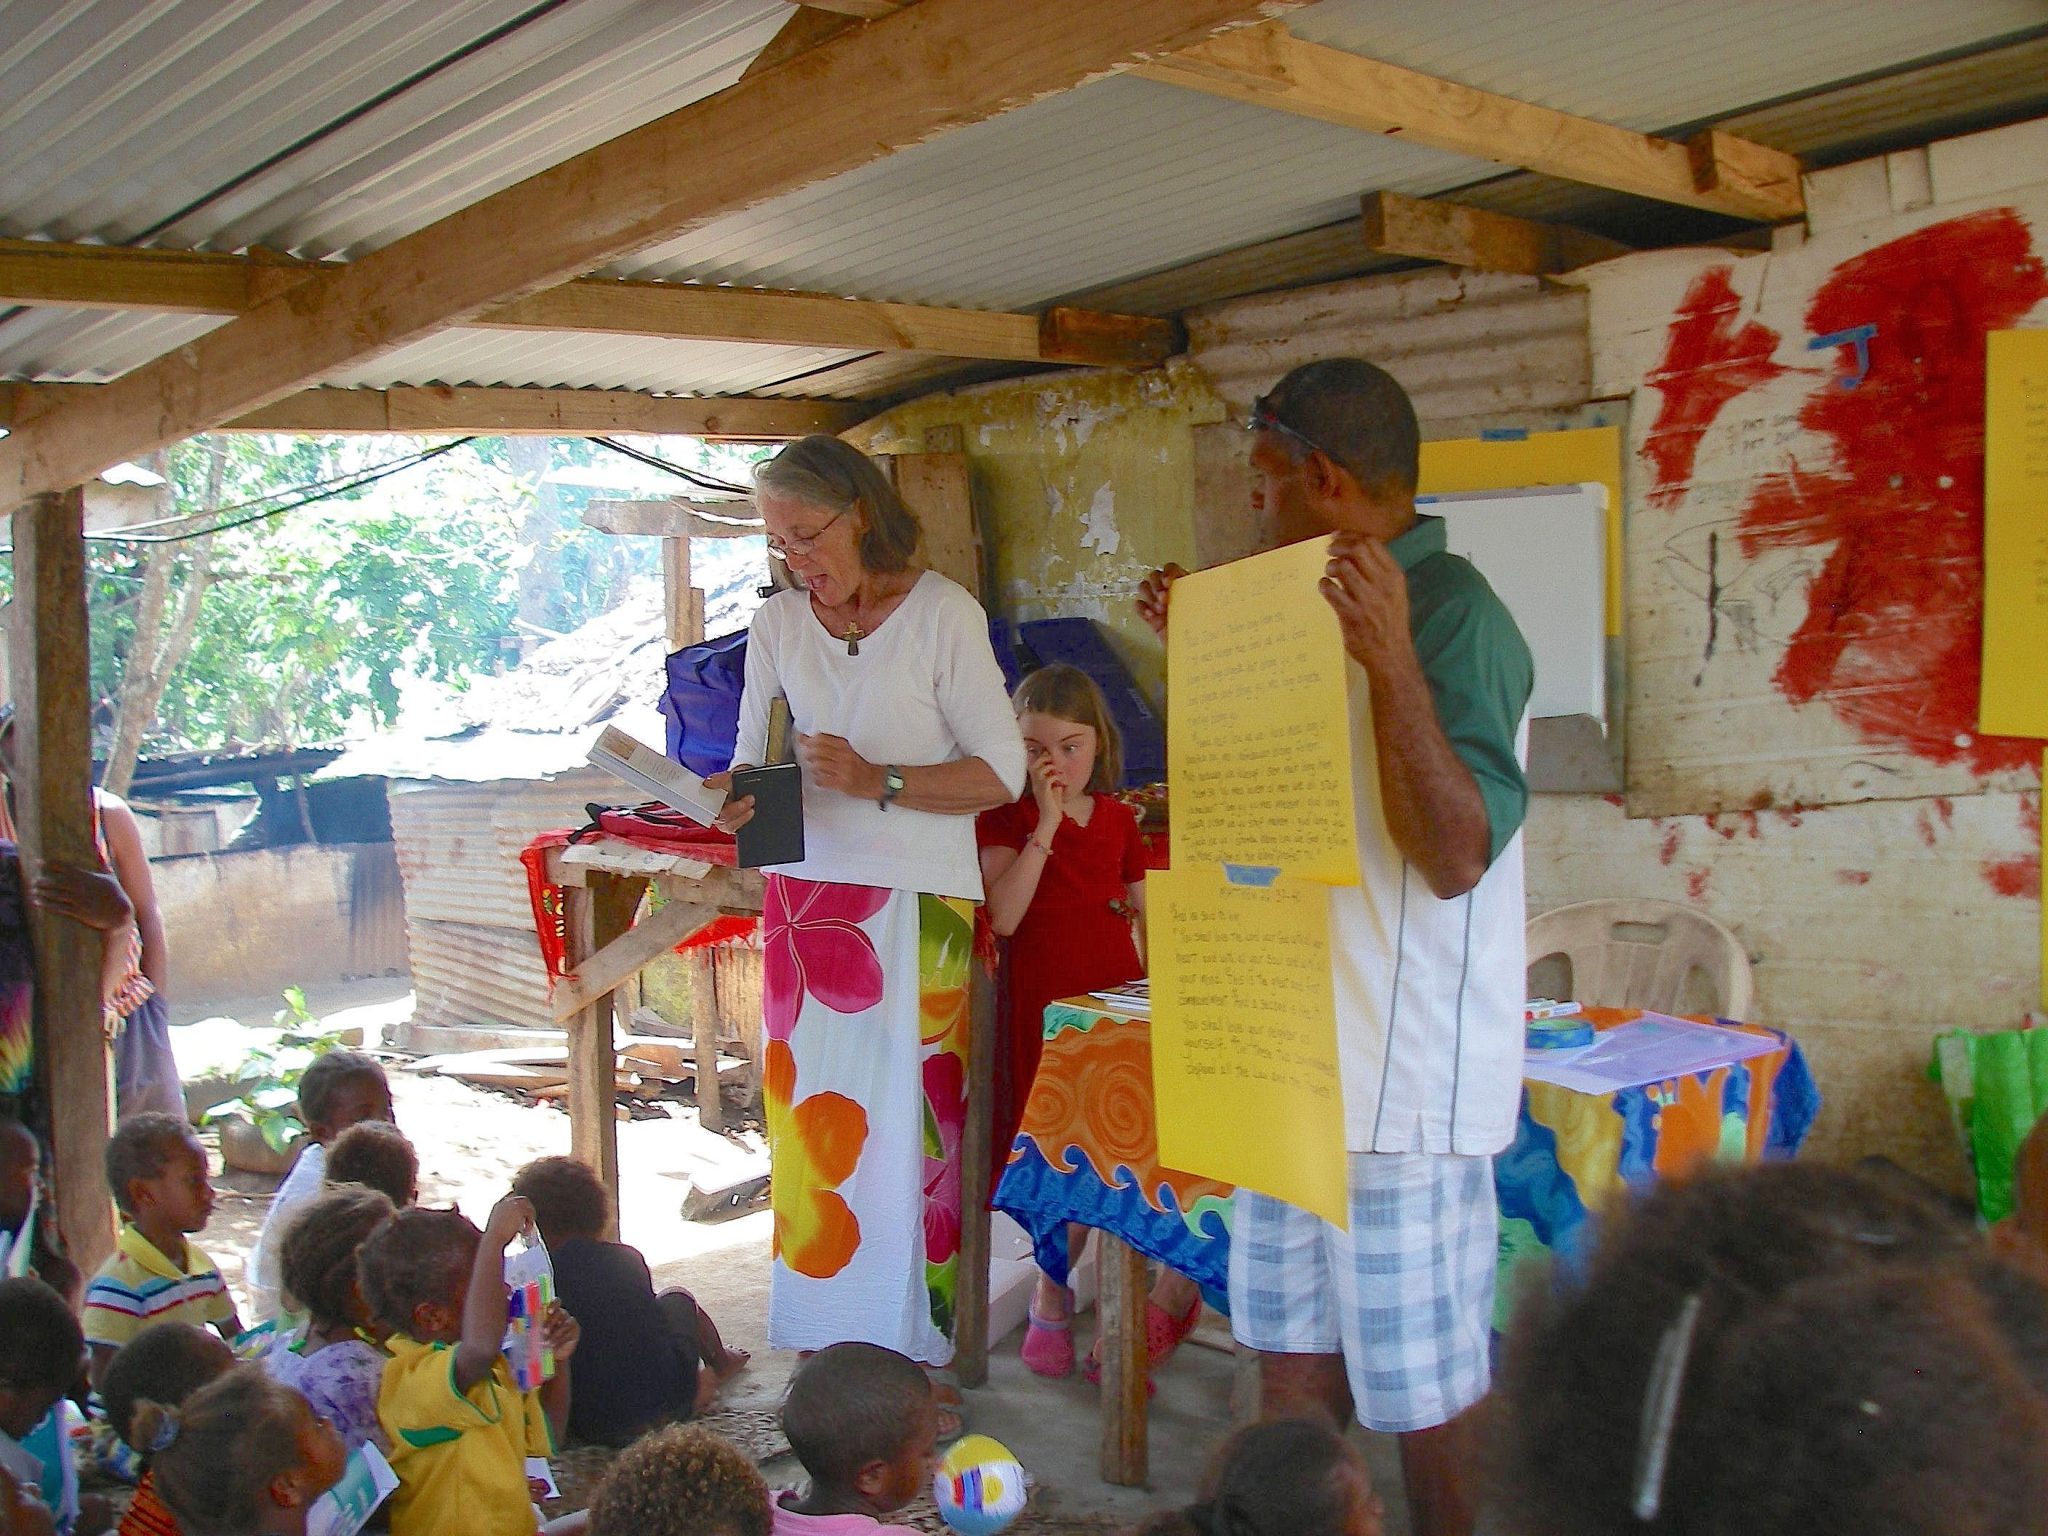 58-jeff-and-anne-donated-bibles-in-bislama-and-english-to-the-tagabe-village-willie-stood-by-to-translate-what-i-said-into-bislama-young-laura-helped-distribute-prizes-to-the-children